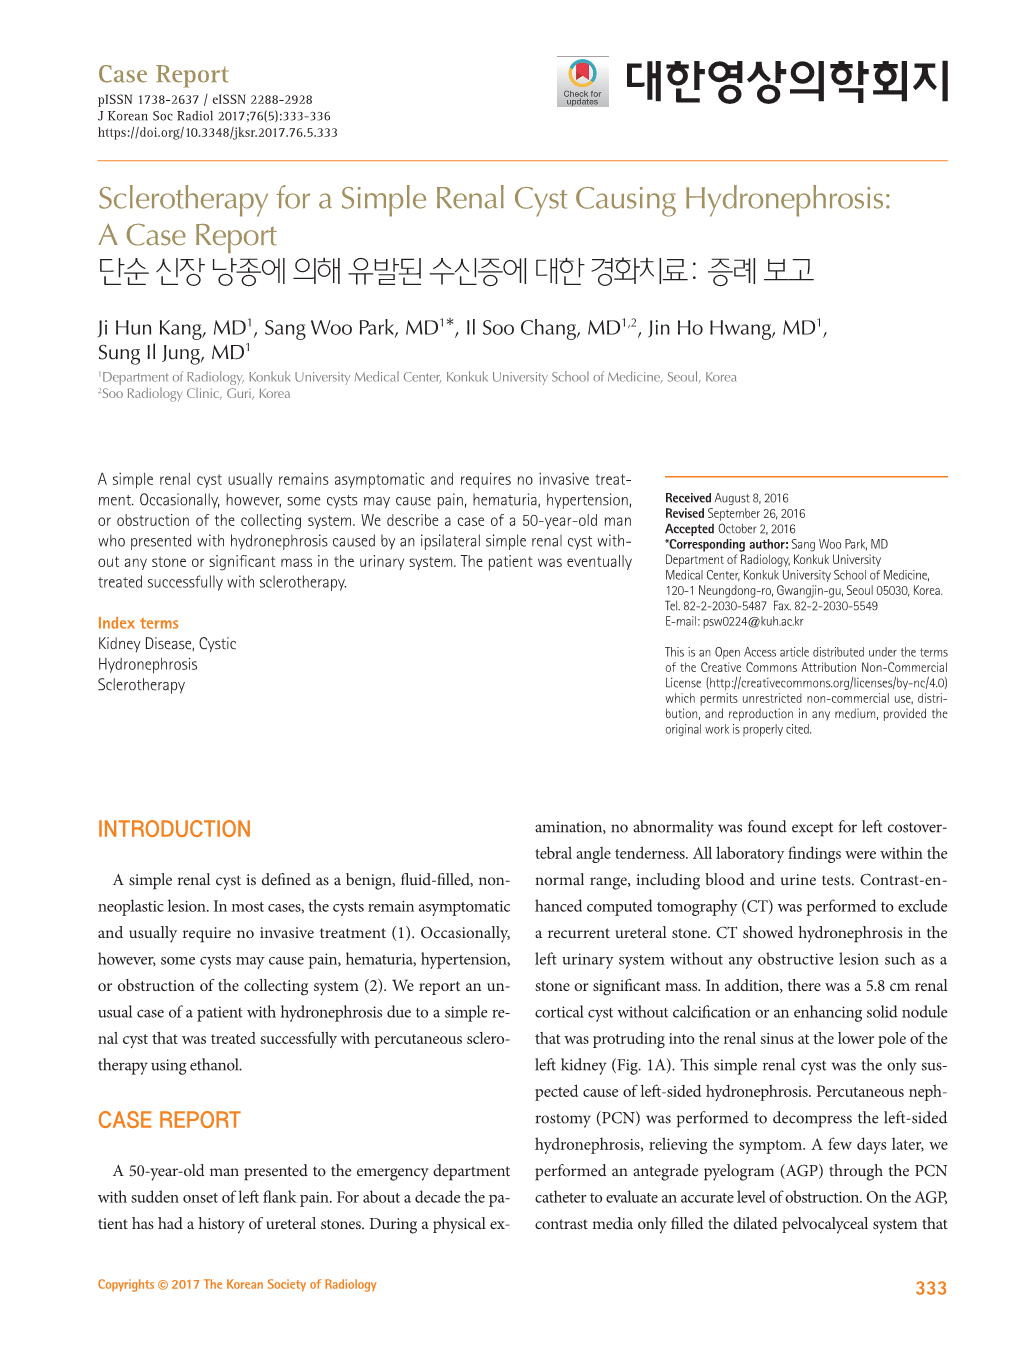 Sclerotherapy for a Simple Renal Cyst Causing Hydronephrosis: a Case Report 단순 신장 낭종에 의해 유발된 수신증에 대한 경화치료: 증례 보고